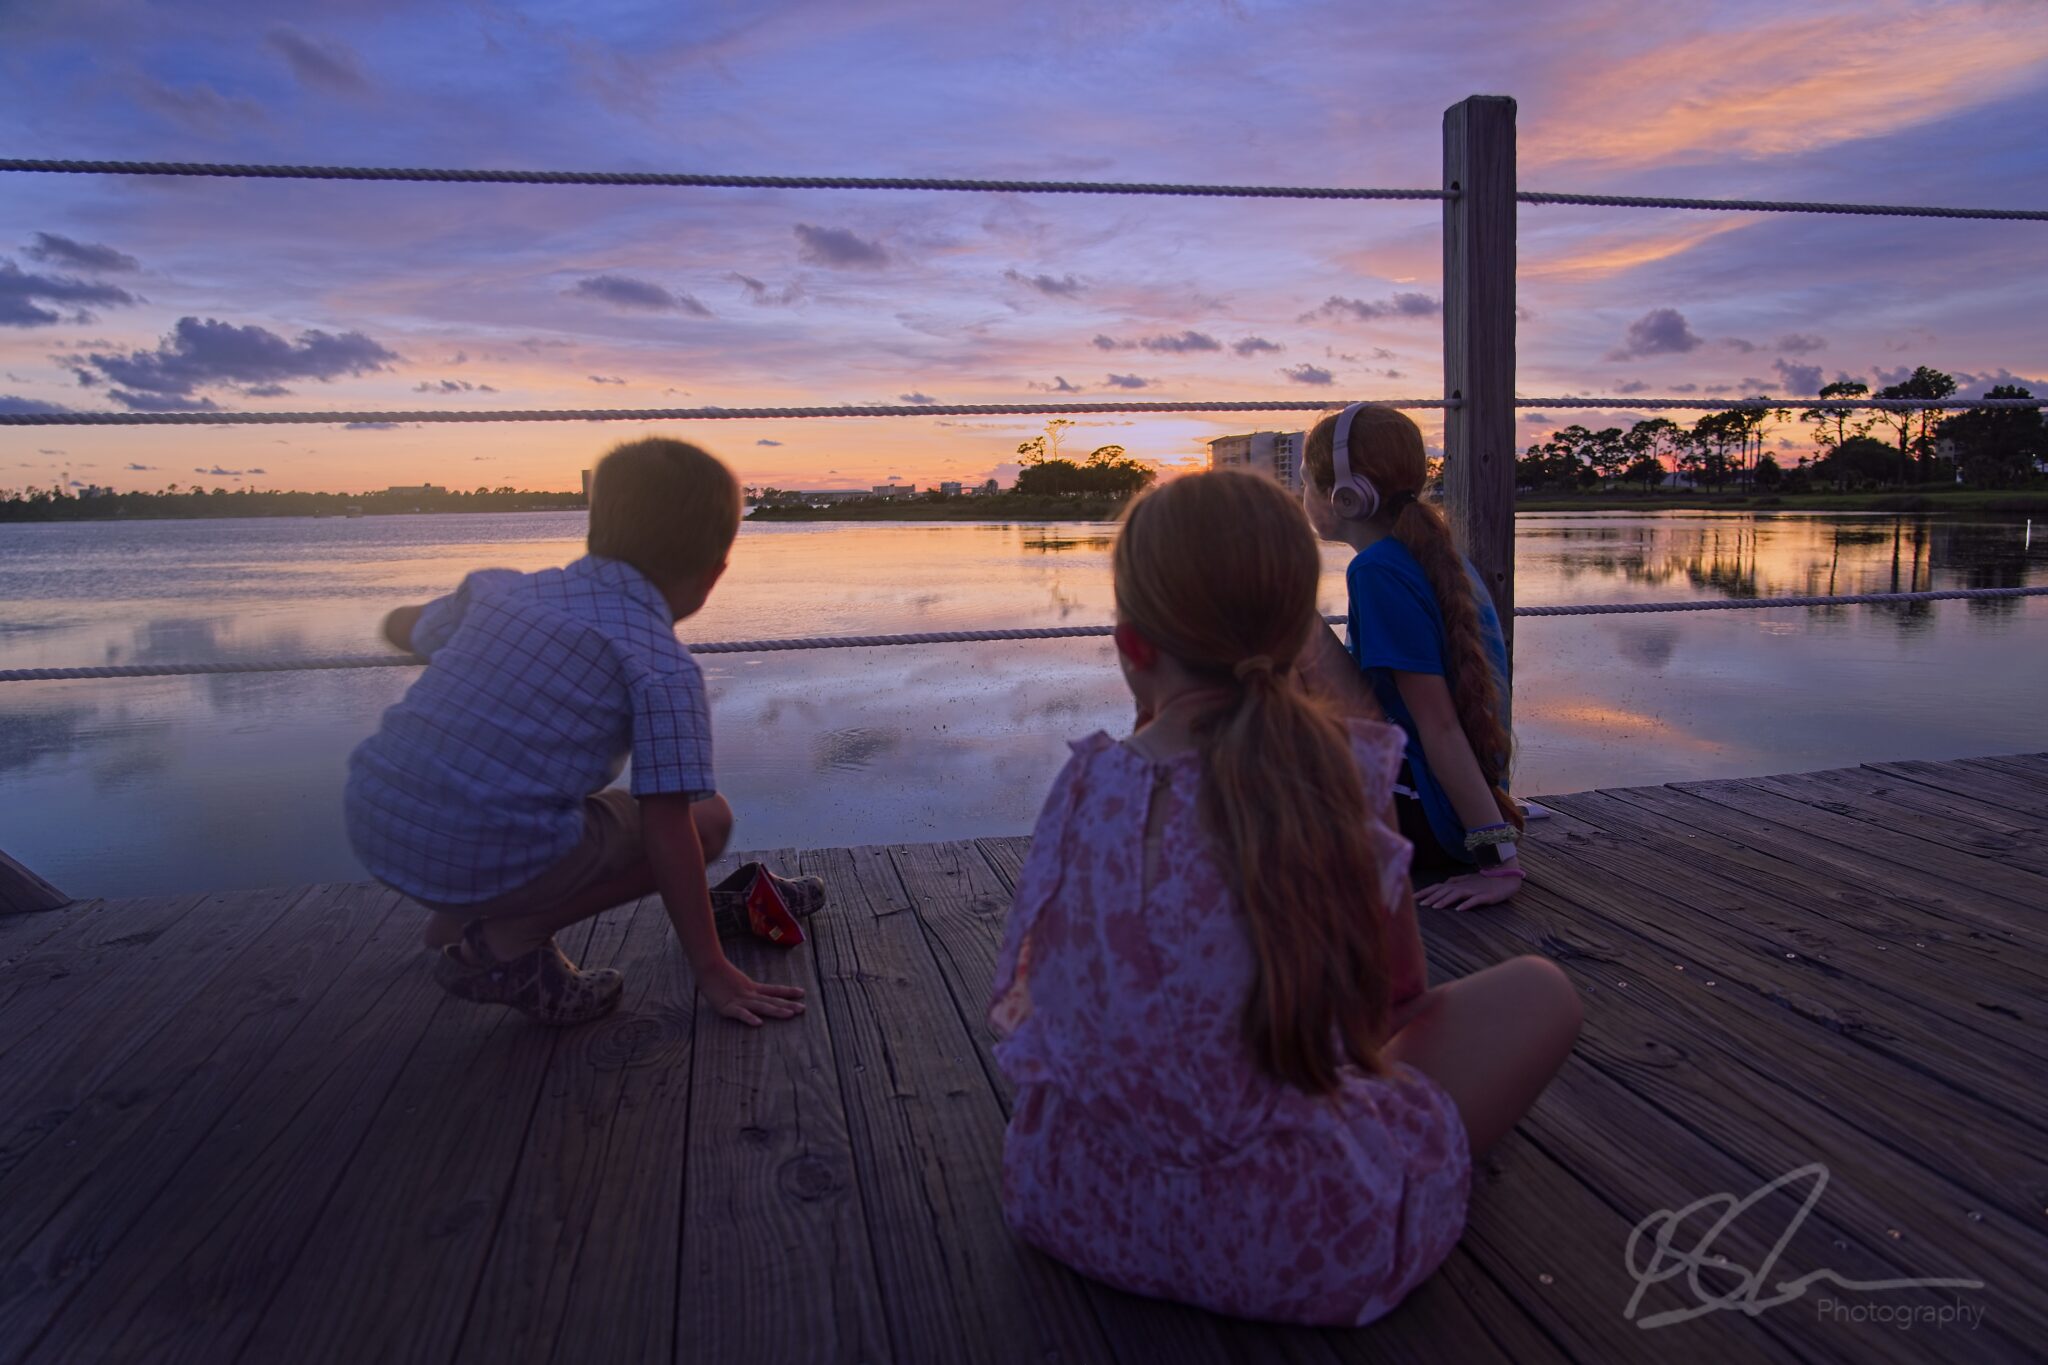 The kids enjoying the sunset and watching the Great Egret